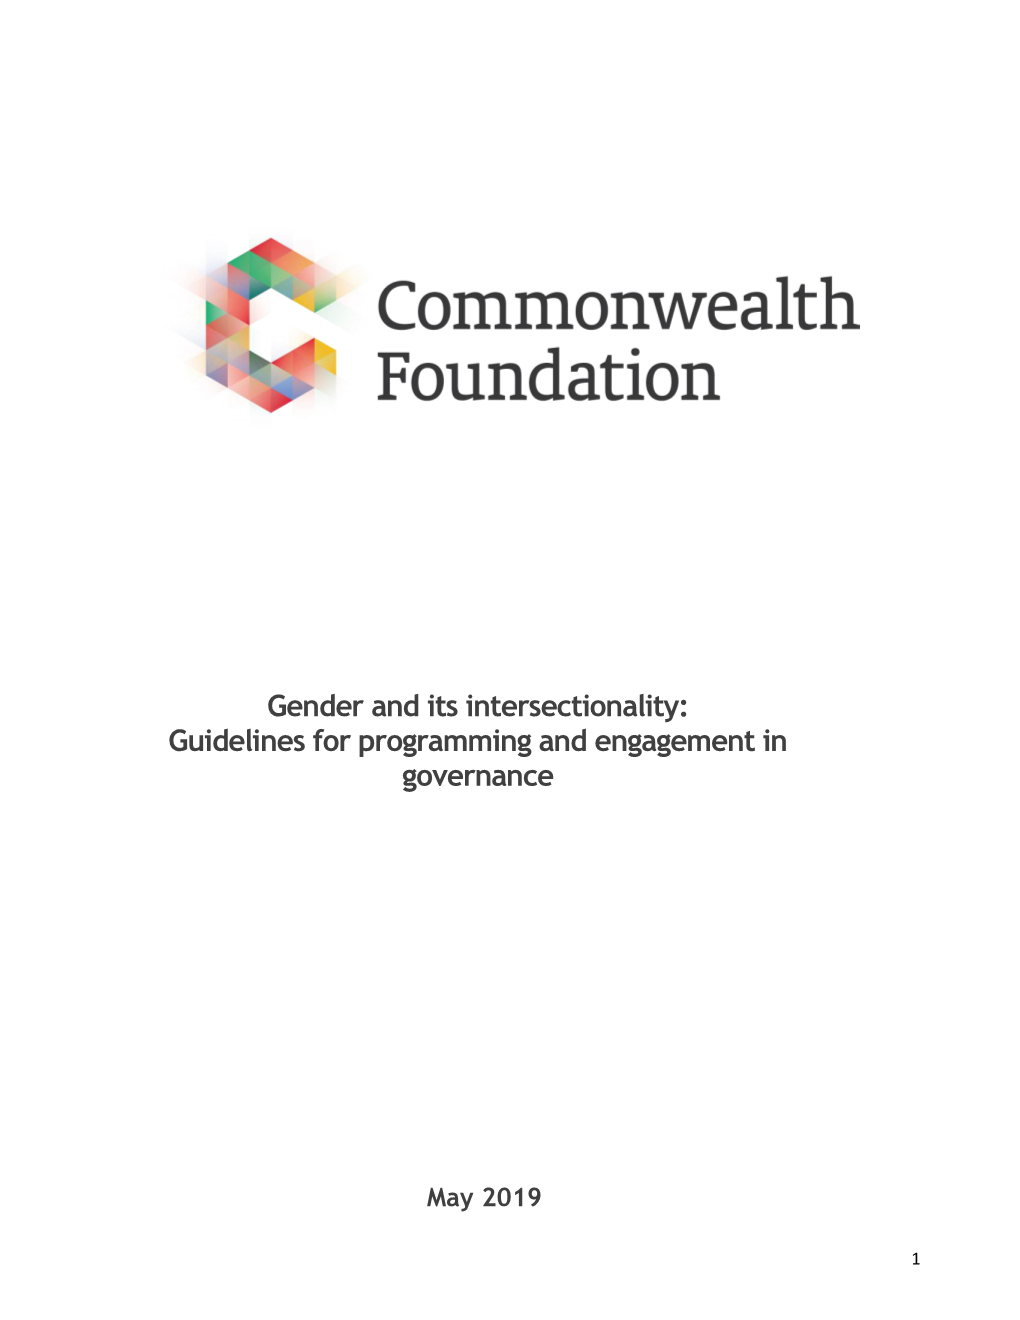 Gender and Its Intersectionality: Guidelines for Programming and Engagement in Governance